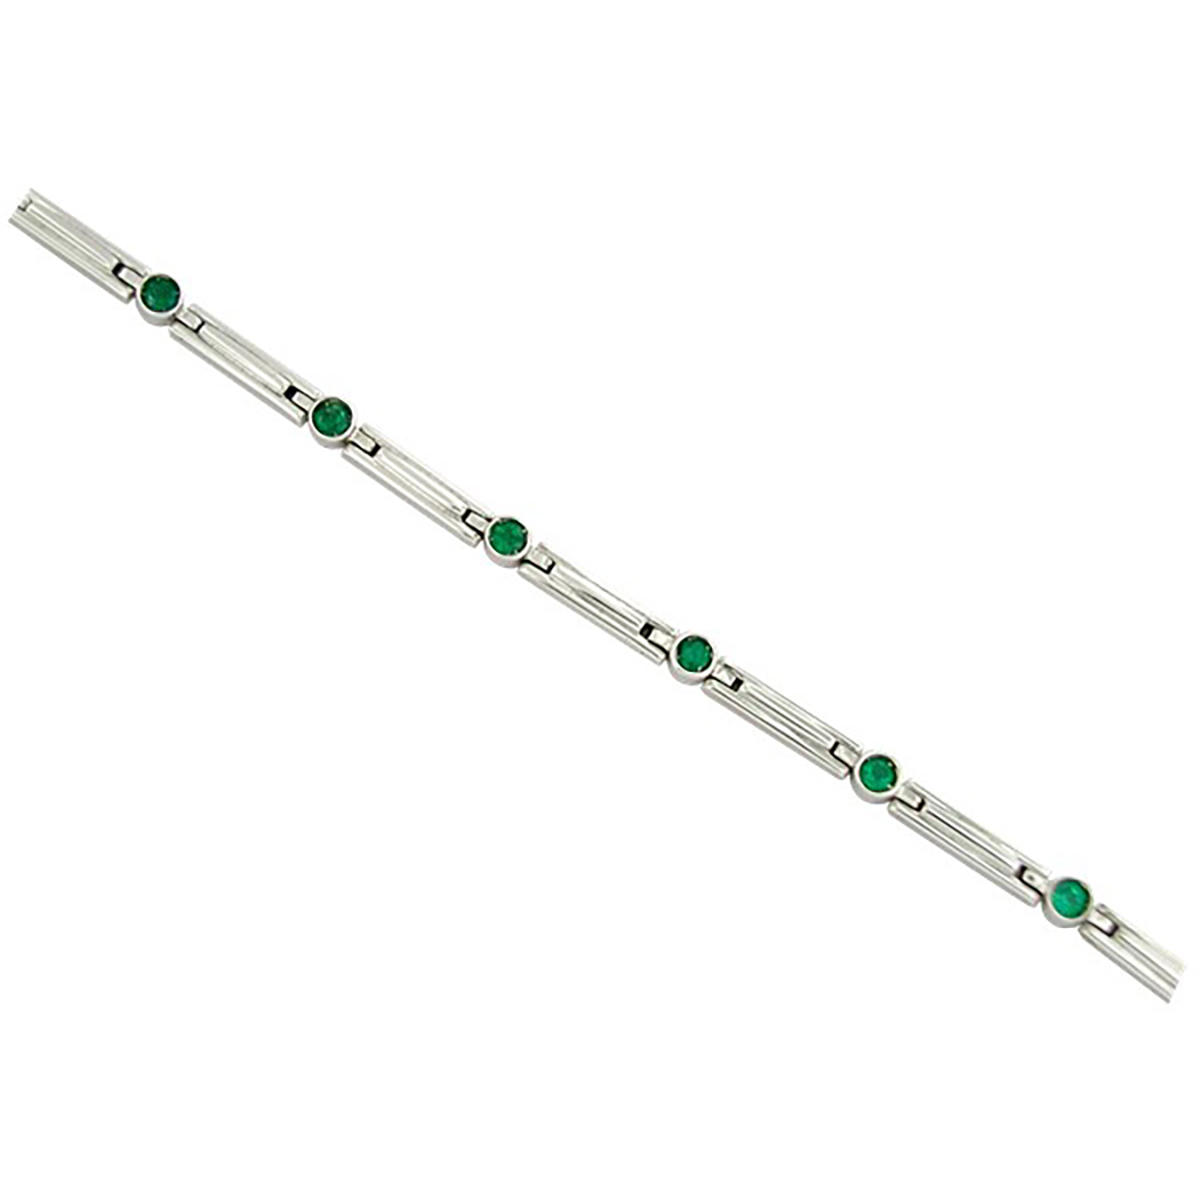 18K white gold emerald bracelet with 9 round cut natural emeralds in dark green color in bezel setting jointed by long links